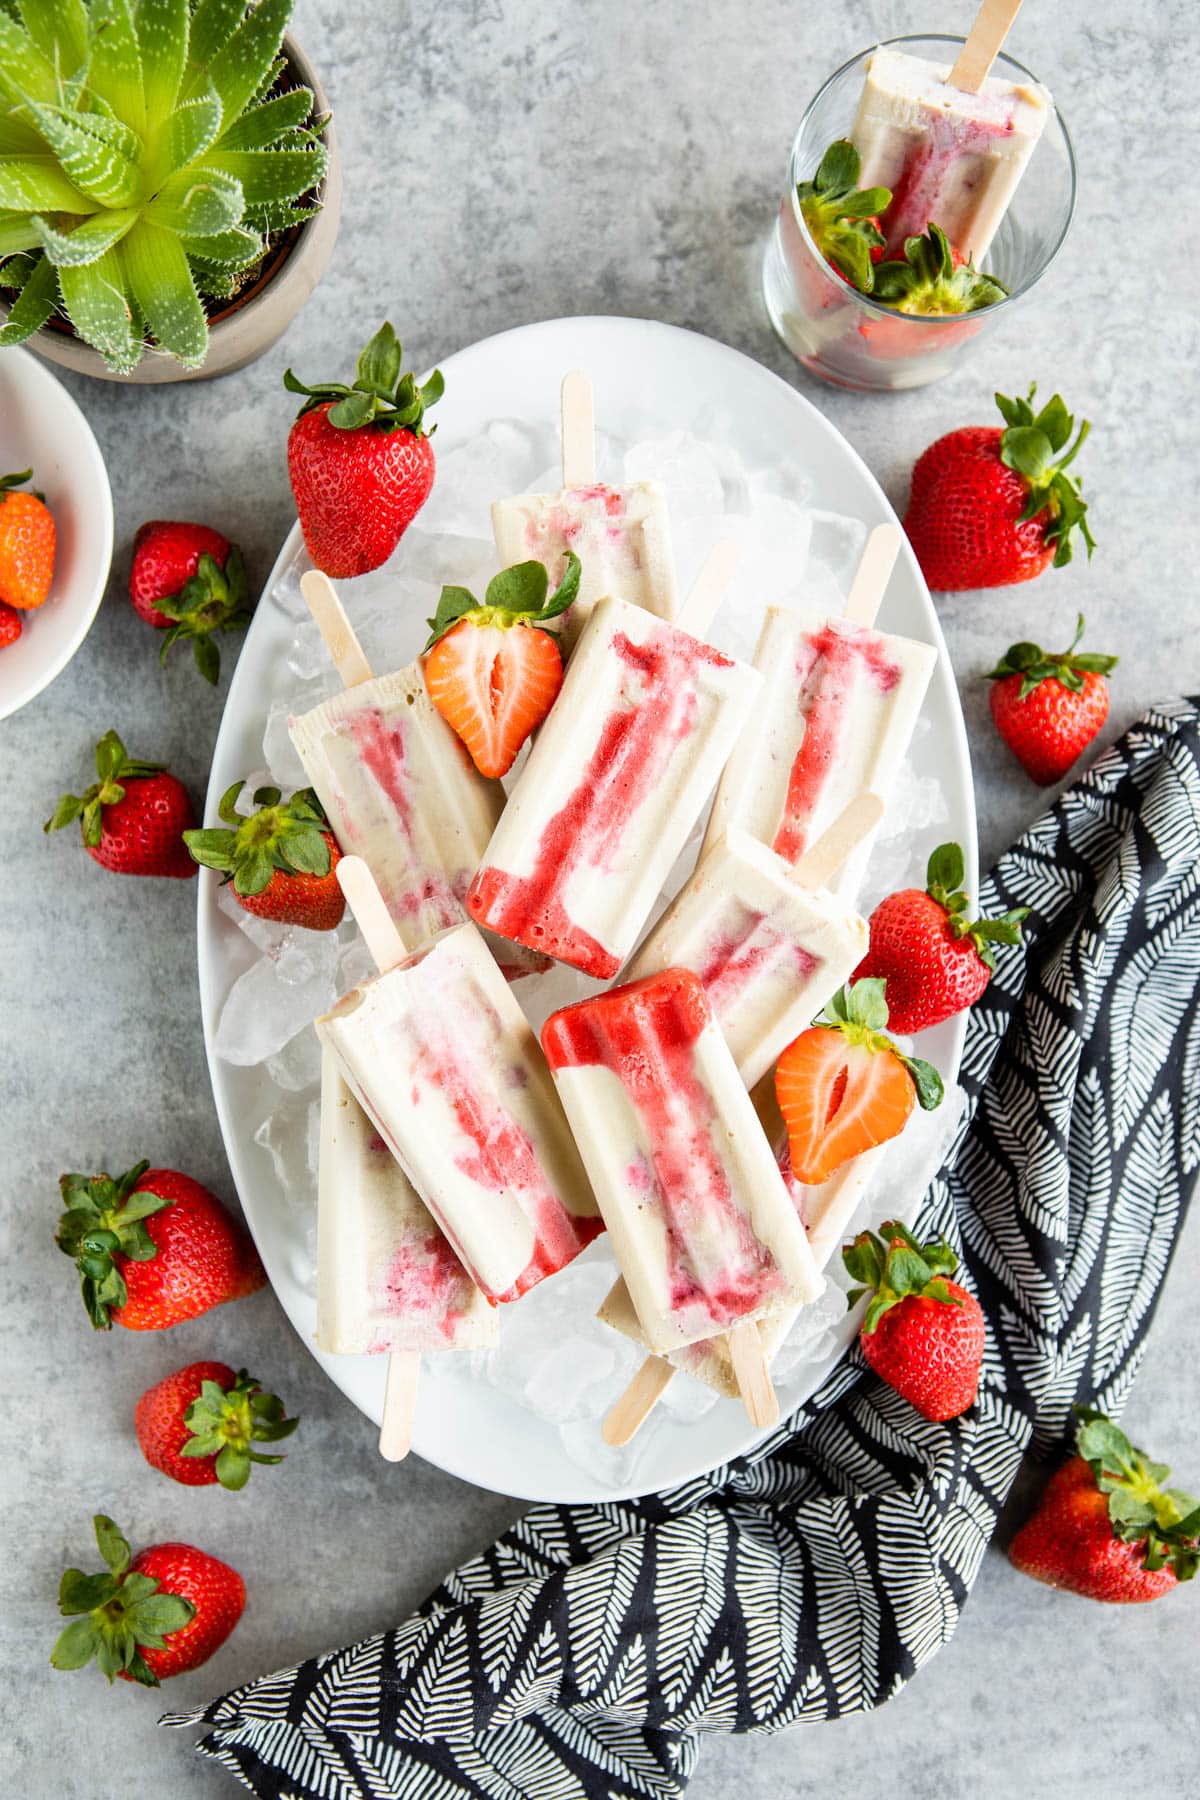 a plate of strawberry popsicles sitting on a pile of ice surrounded by fresh strawberries.